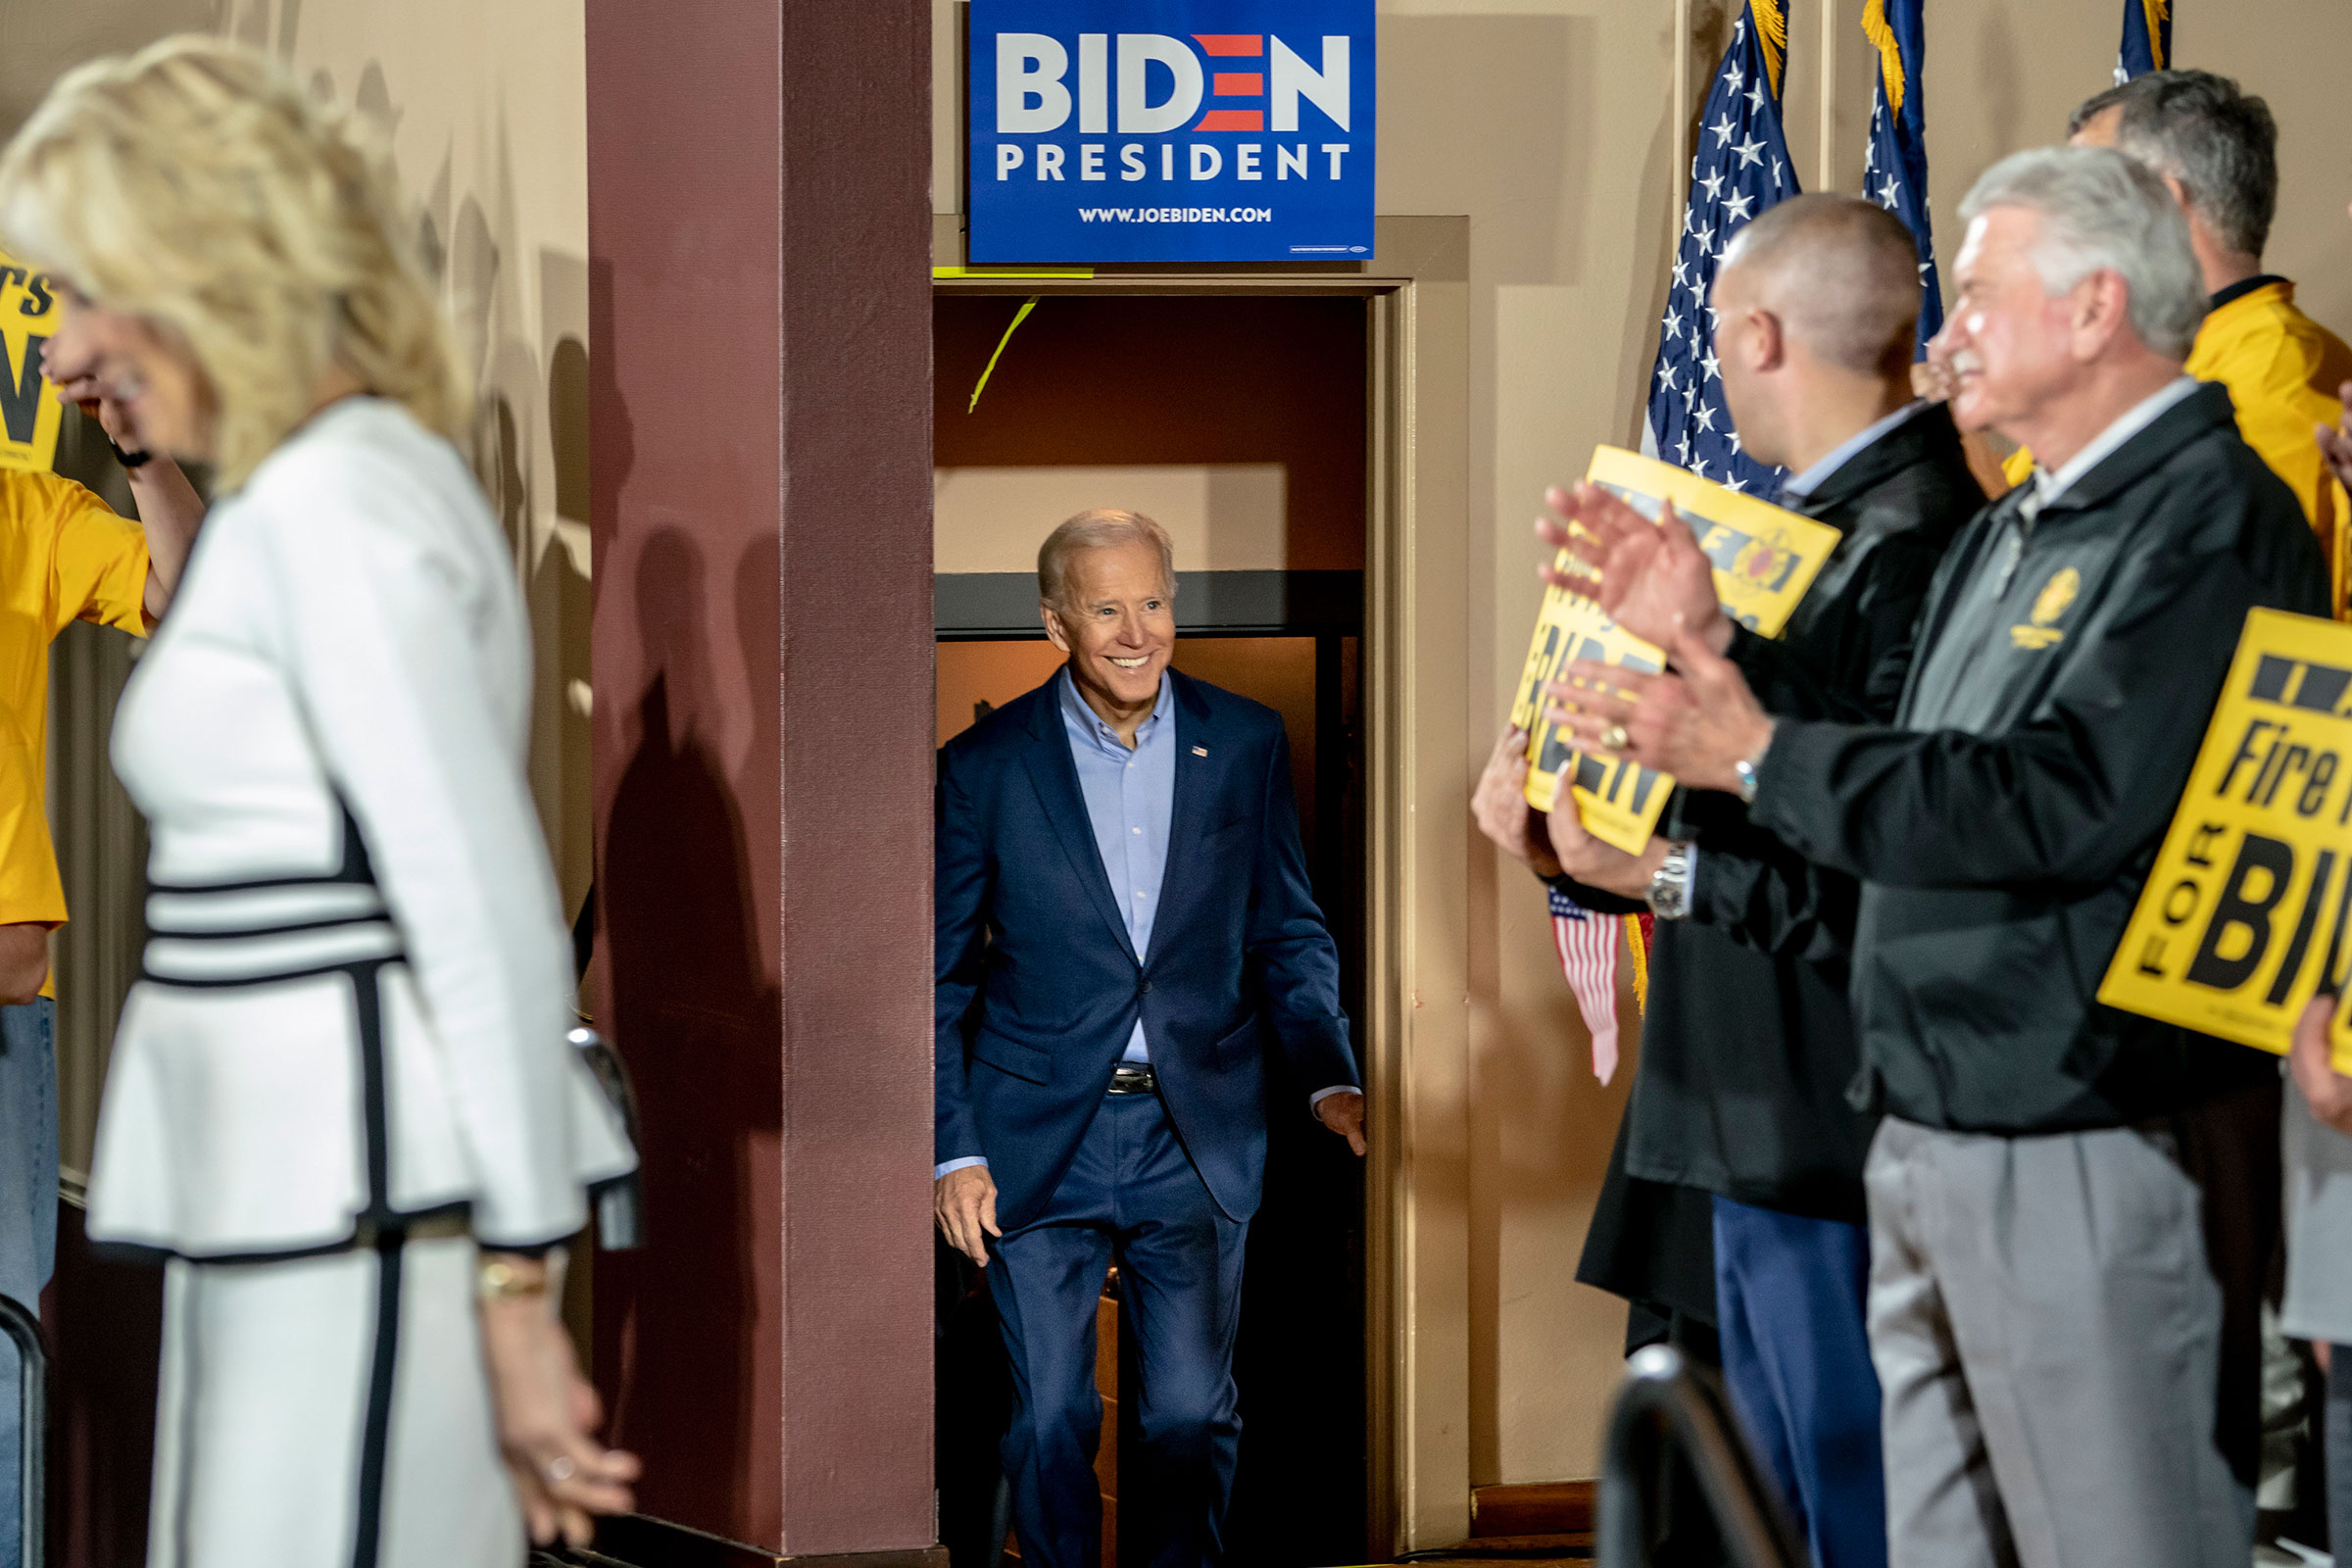 Biden made his first campaign stop on April 29 at the Teamsters Local 249 hall in Pittsburgh. (Mark Peterson—Redux)